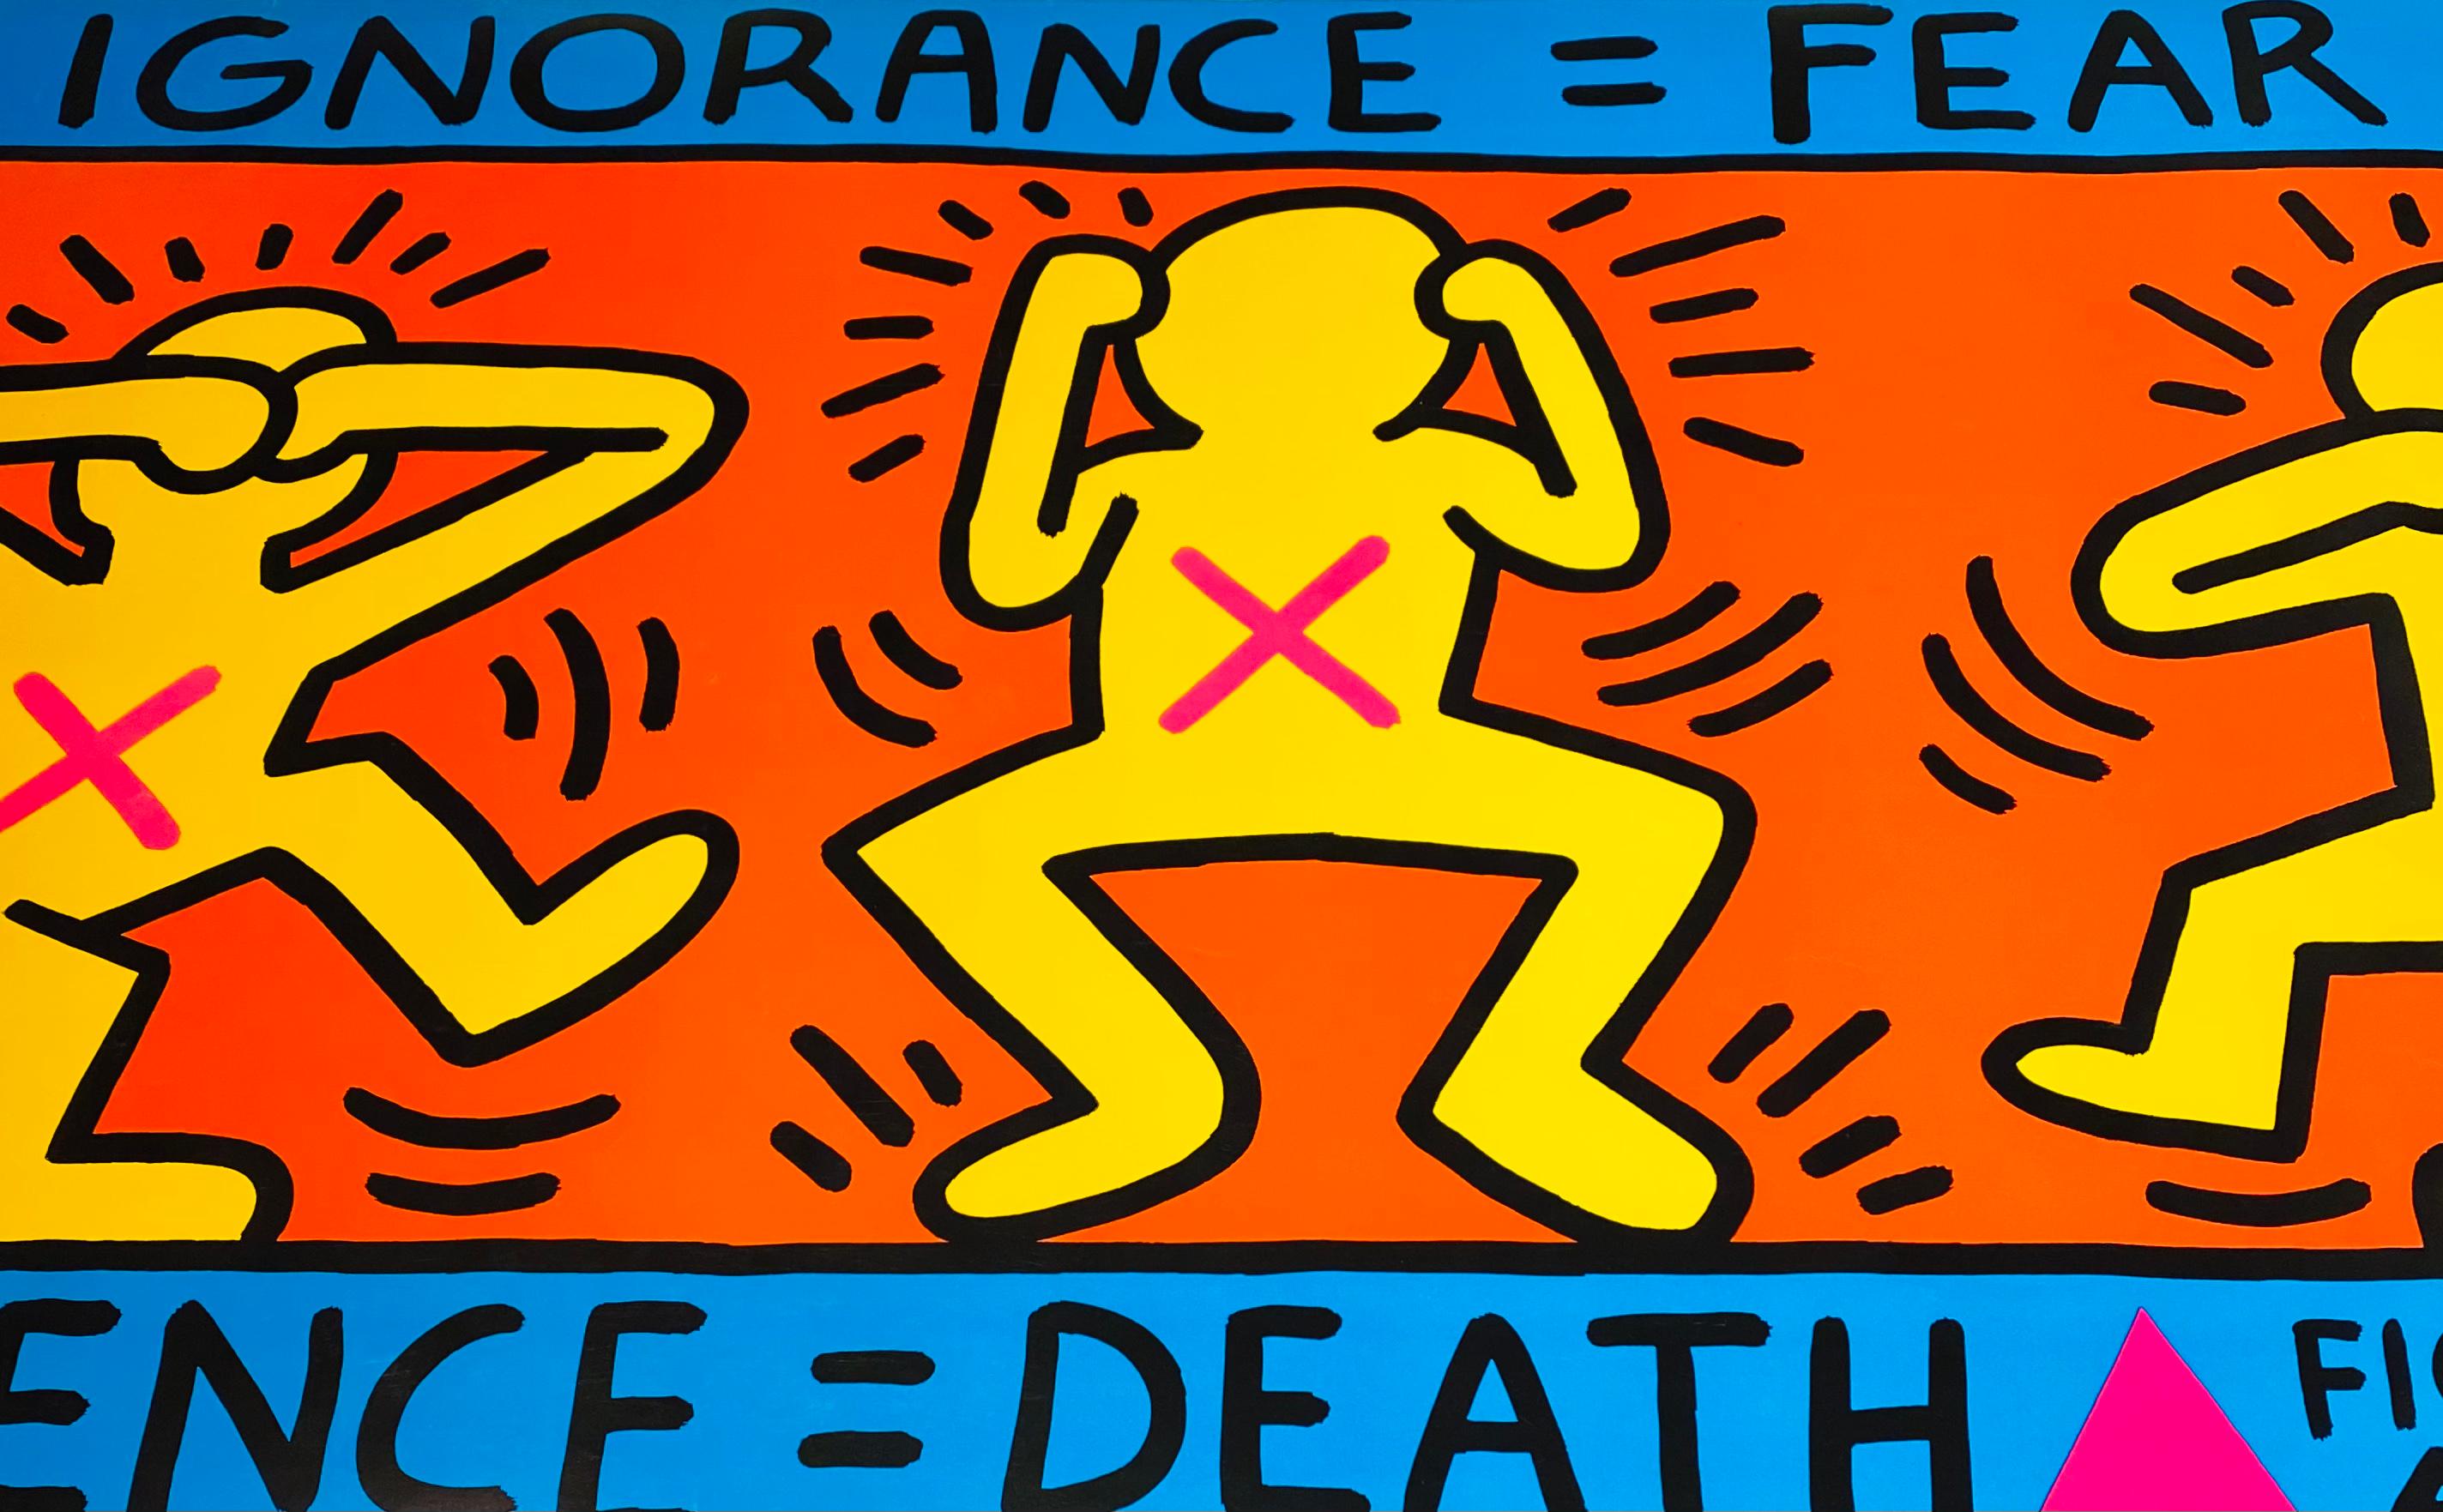 After Keith Haring Ignorance = Fear, 1989 (Keith Haring Act Up poster) 1